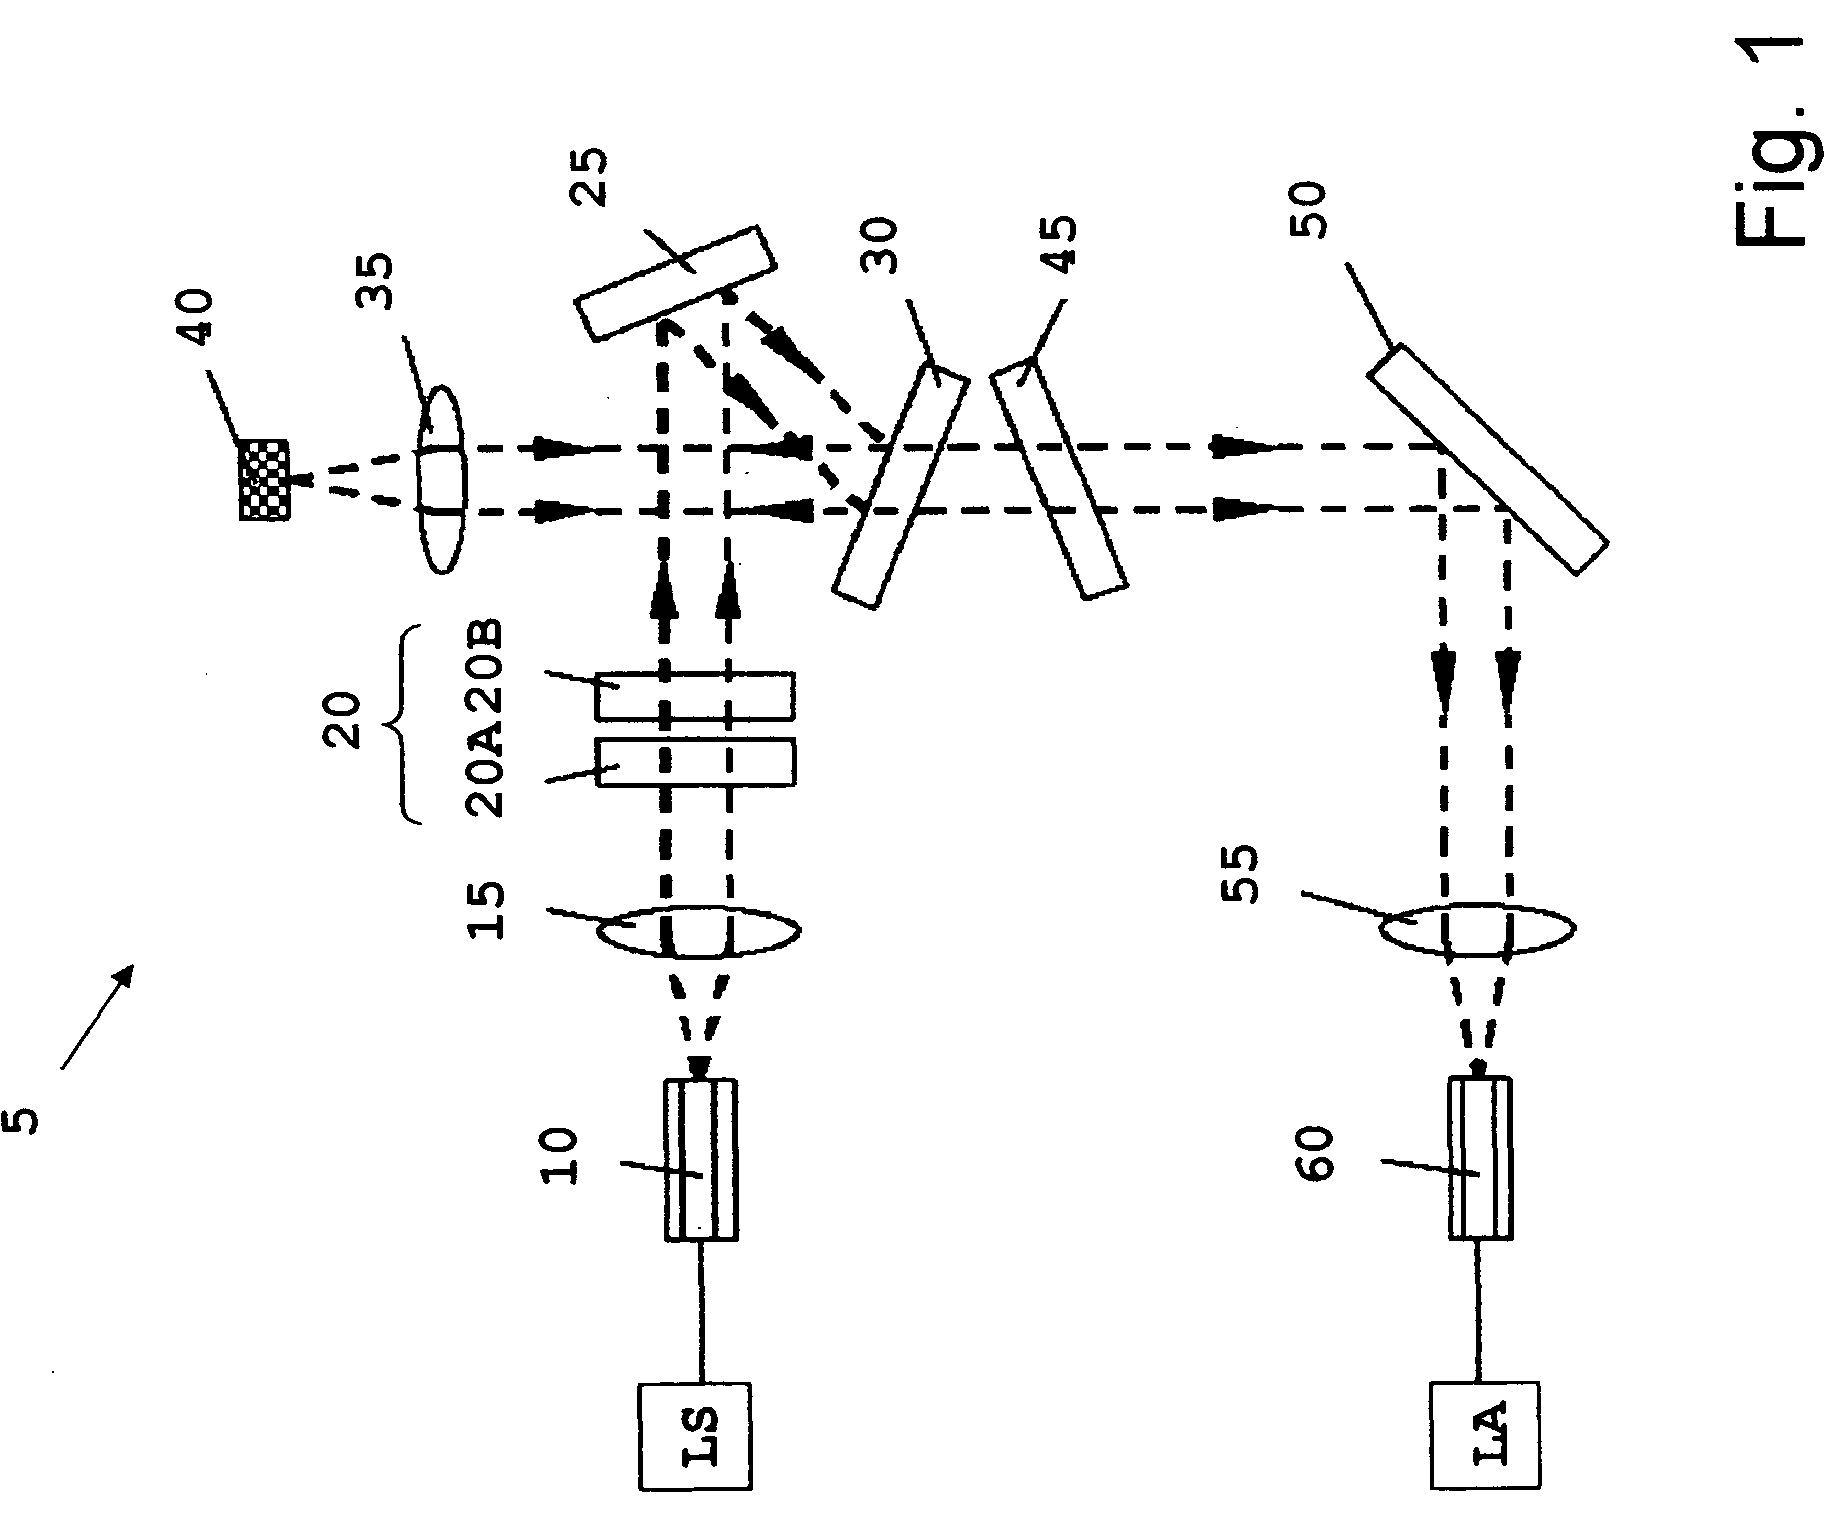 Method and apparatus for conducting Raman spectroscopy